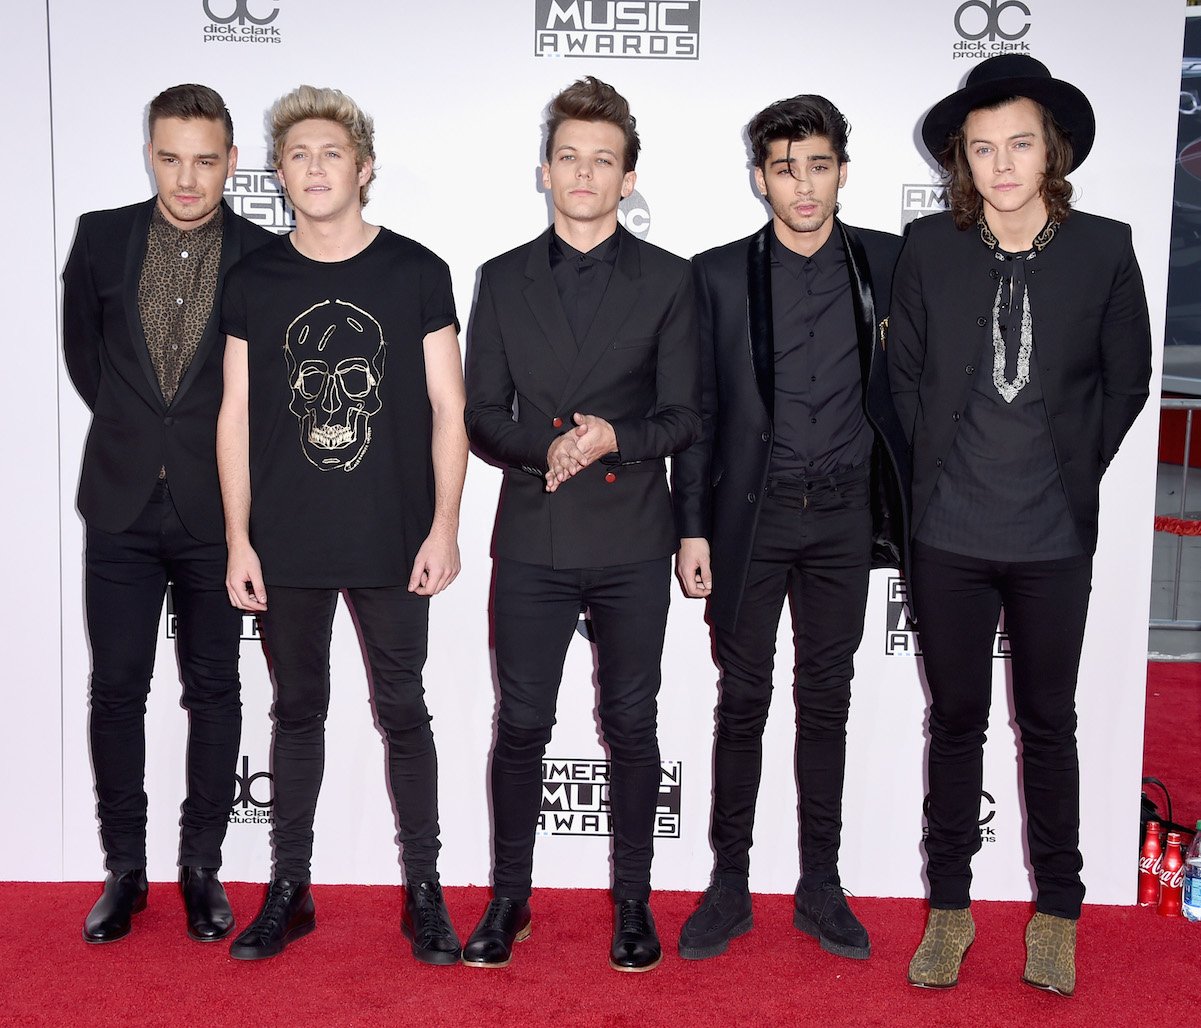 One Direction posing on the red carpet at the 2014 American Music Awards